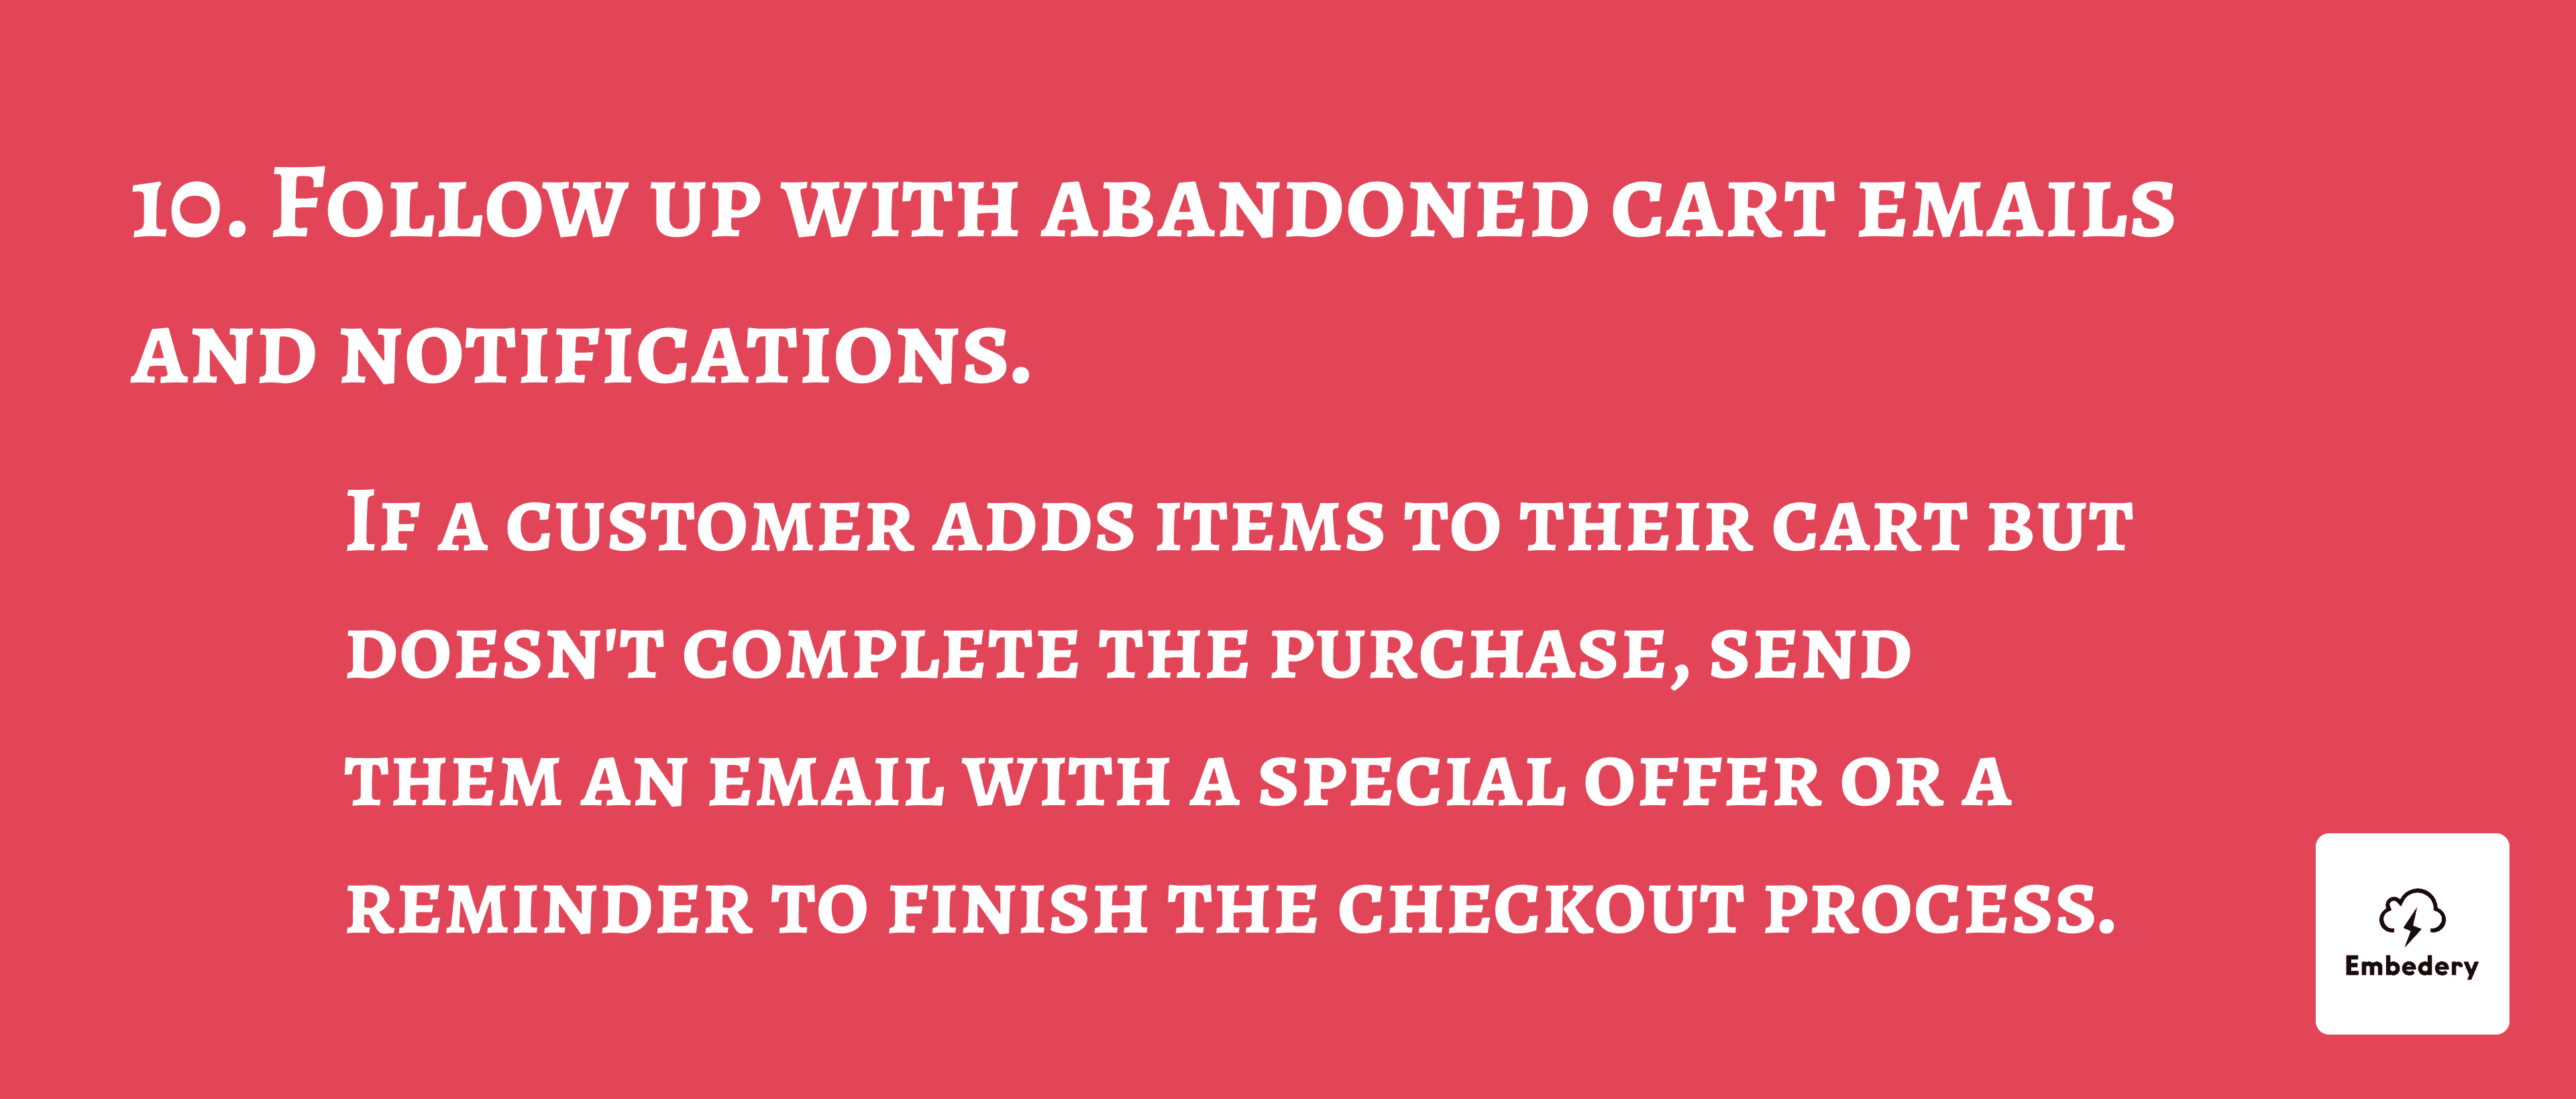 Follow up with abandoned cart emails and notifications